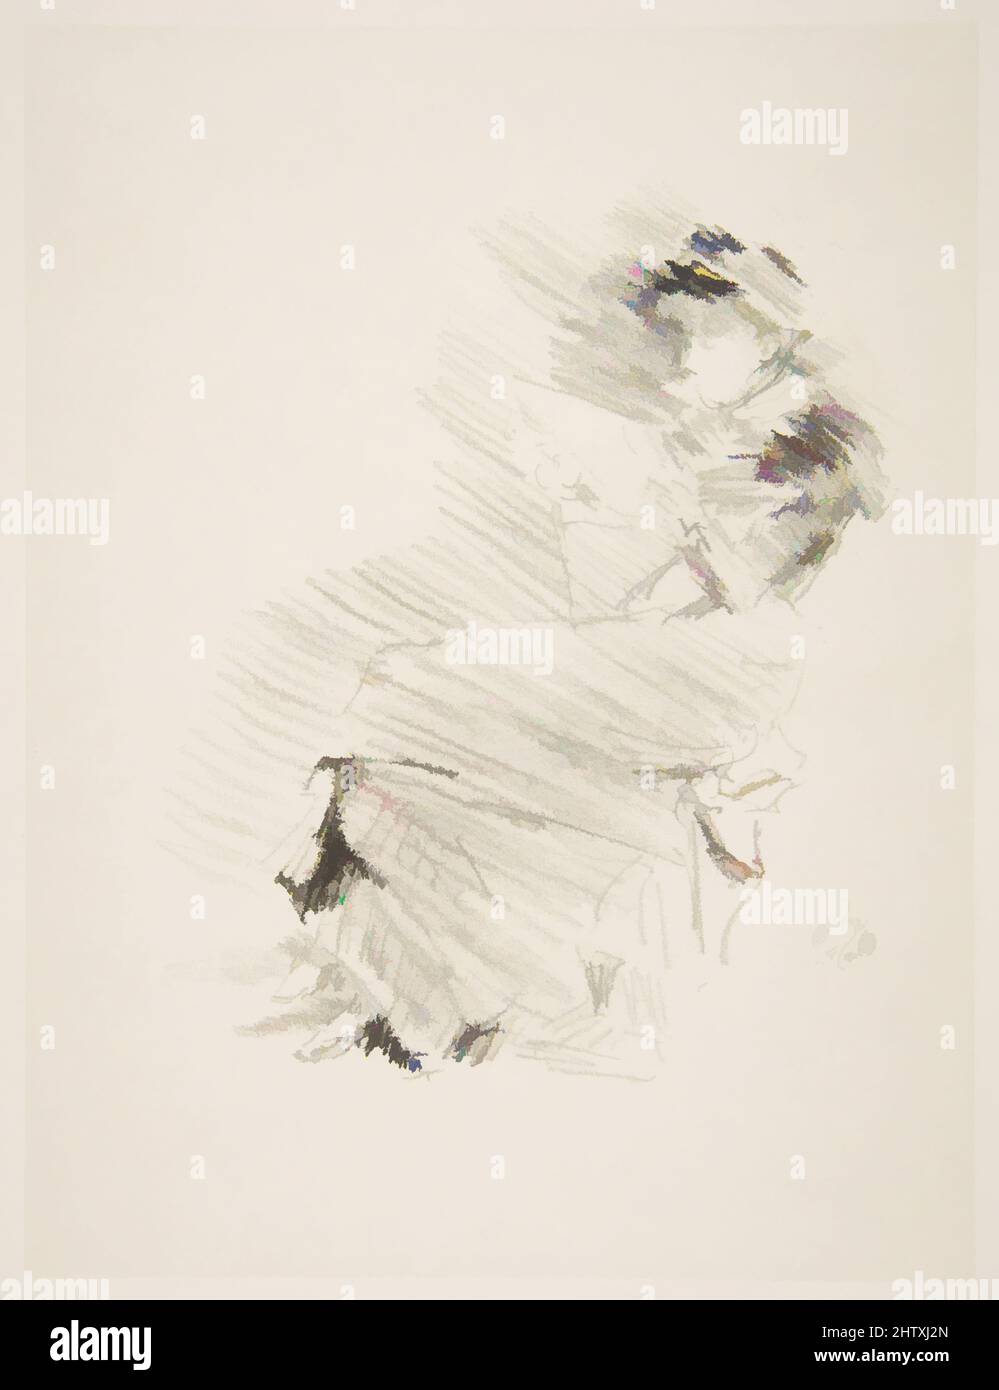 Art inspired by Reading, 1879, Lithograph with scraping; fourth state of four (Chicago); printed in black ink on grayish chine mounted on ivory wove paper, Image: 6 1/8 × 5 1/8 in. (15.5 × 13 cm), Prints, James McNeill Whistler (American, Lowell, Massachusetts 1834–1903 London, Classic works modernized by Artotop with a splash of modernity. Shapes, color and value, eye-catching visual impact on art. Emotions through freedom of artworks in a contemporary way. A timeless message pursuing a wildly creative new direction. Artists turning to the digital medium and creating the Artotop NFT Stock Photo